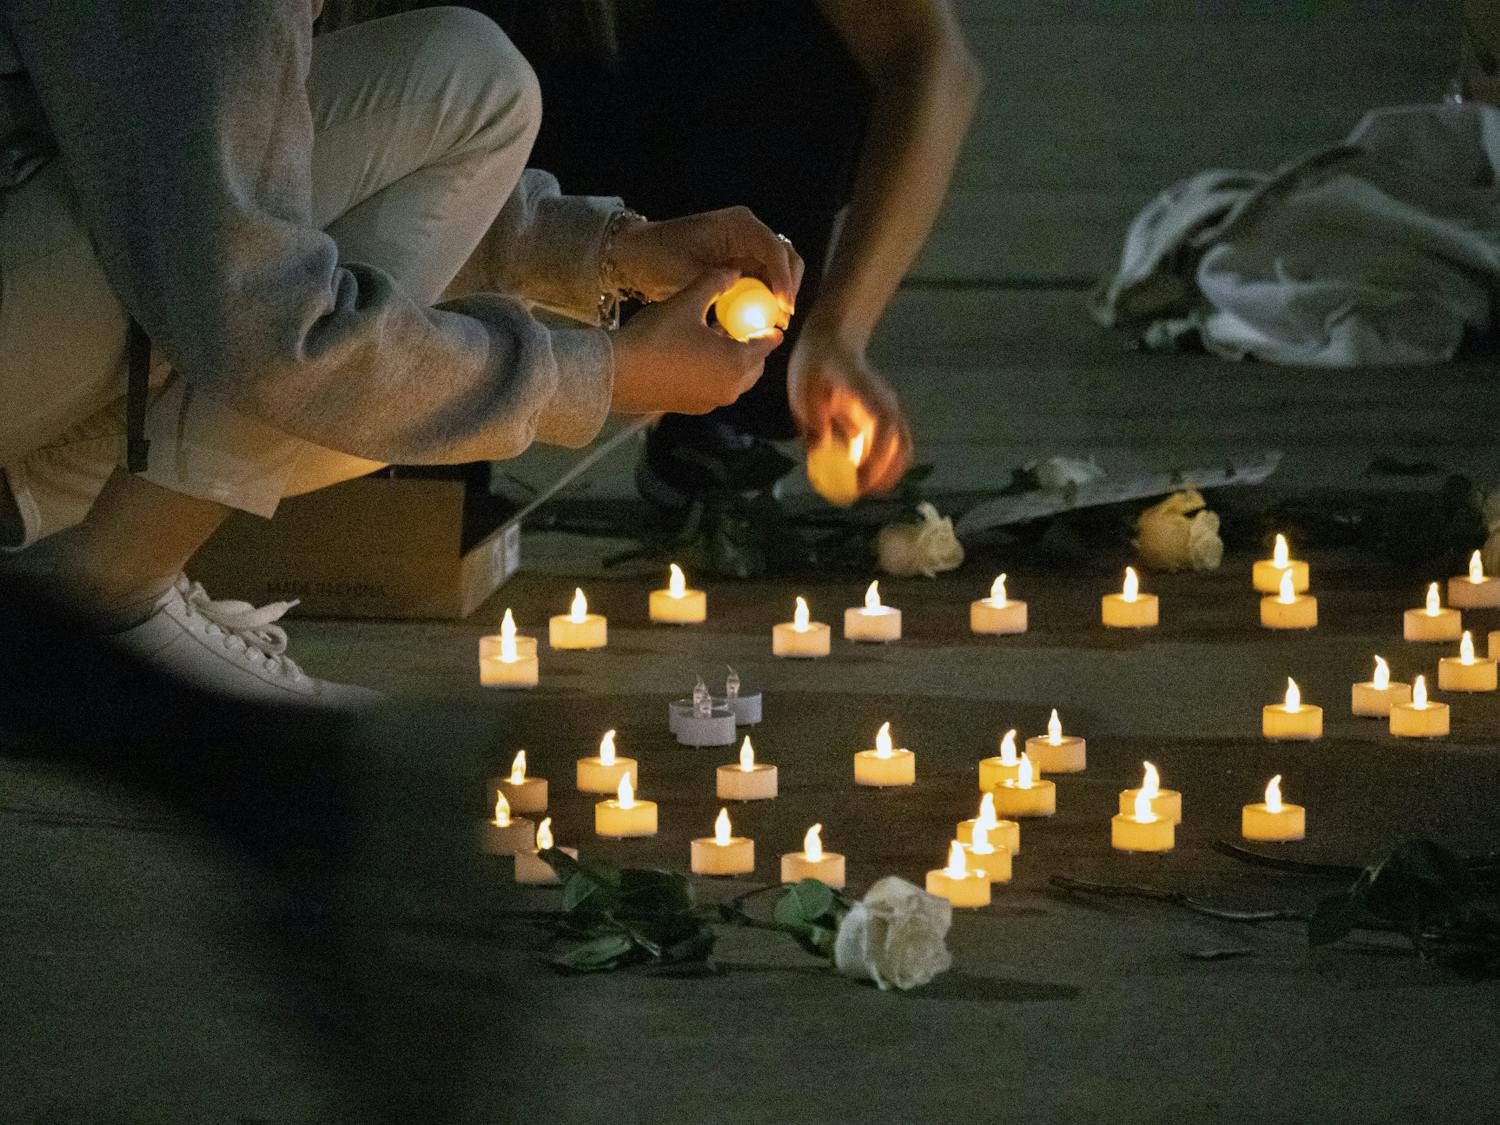 UF Turkish Student Association members turn off candles as the vigil dedicated to those who died during the Turkey-Syria earthquakes draws to a close Thursday, March 2, 2023.